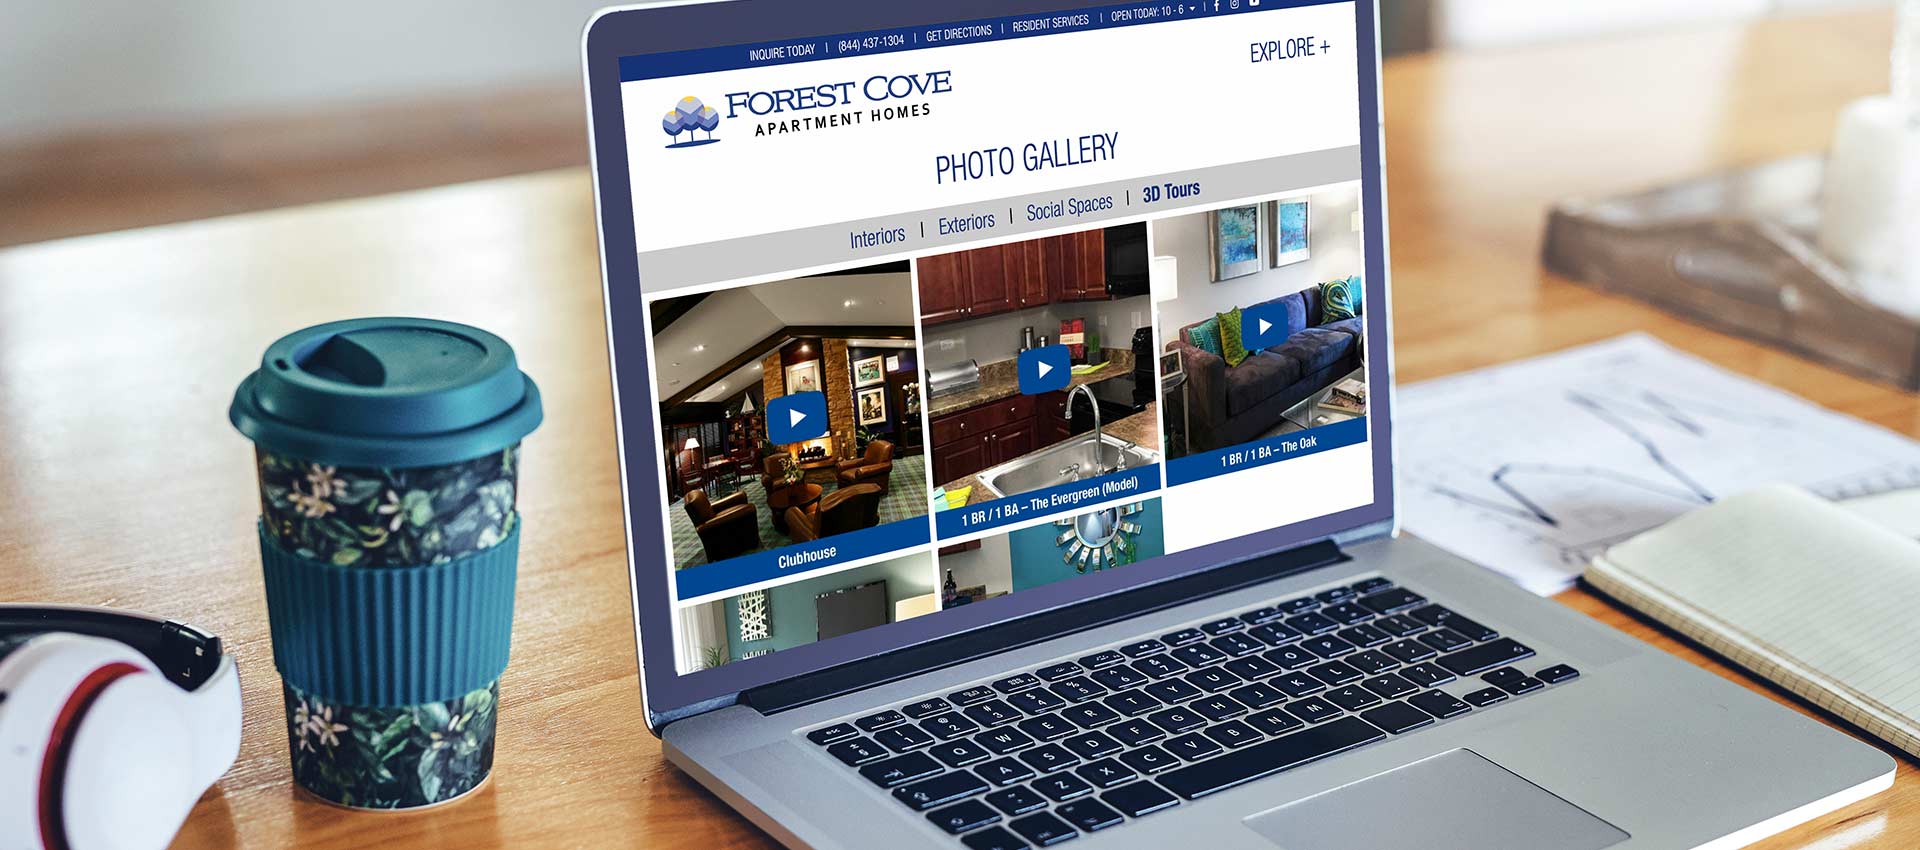 Laptop displaying Forest Cover Apartments Website 3D tour options in the Photo Gallery section